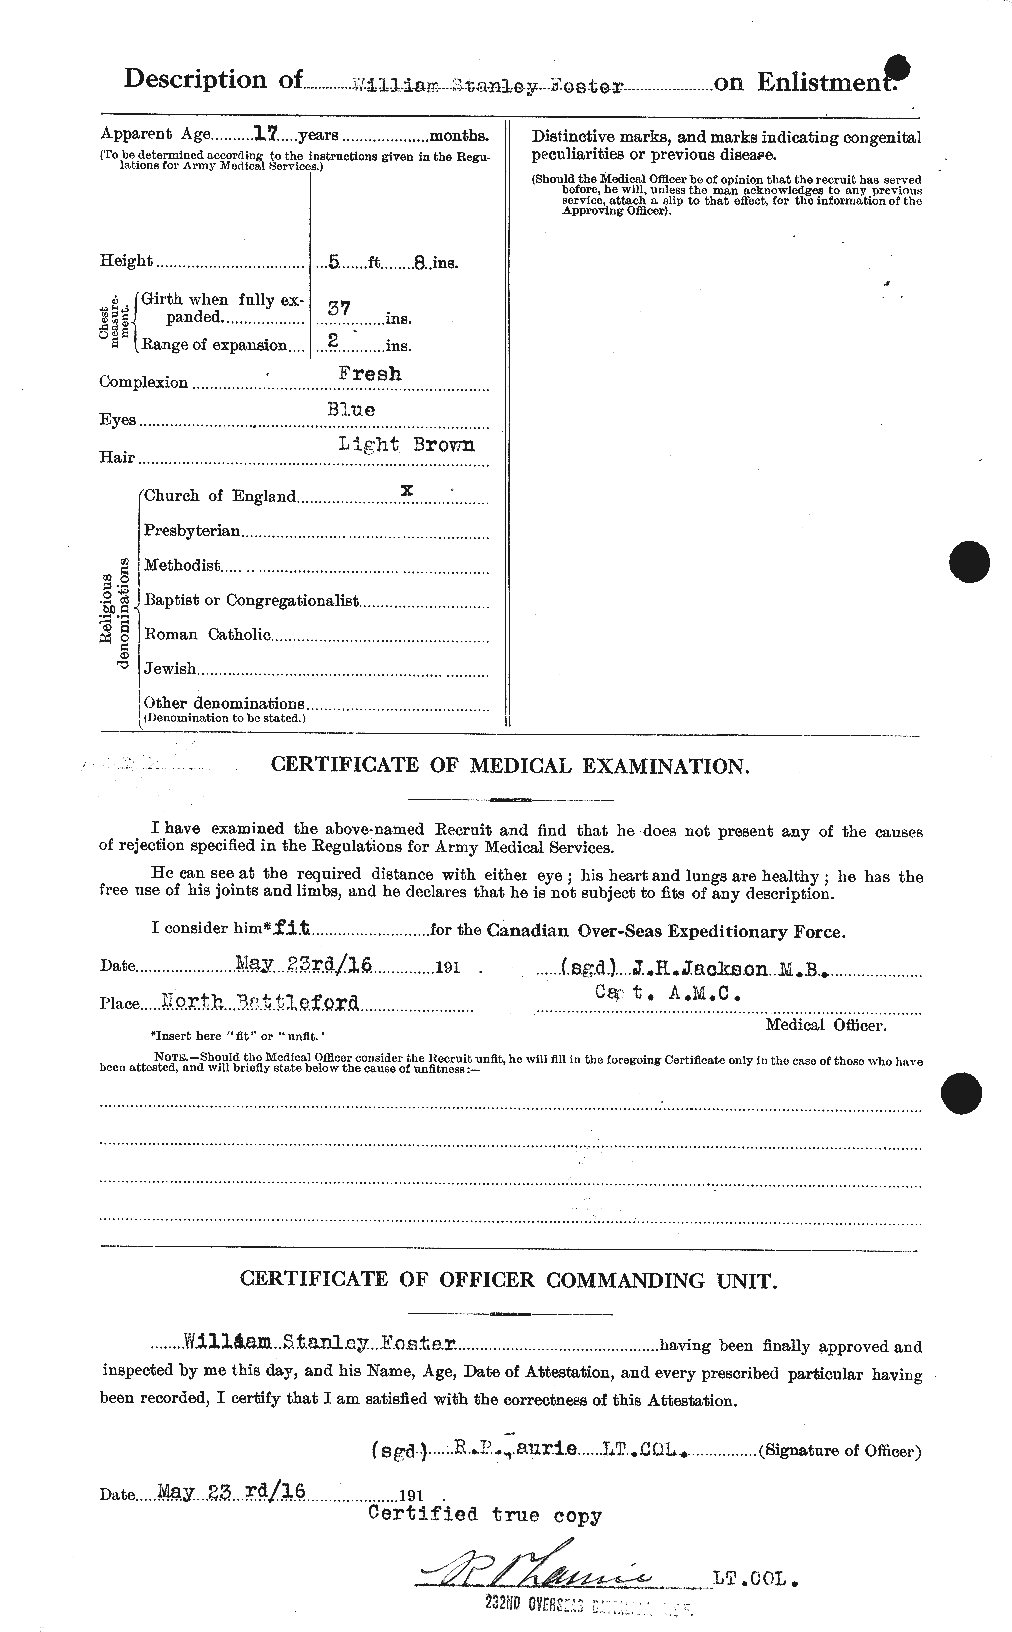 Personnel Records of the First World War - CEF 328773b